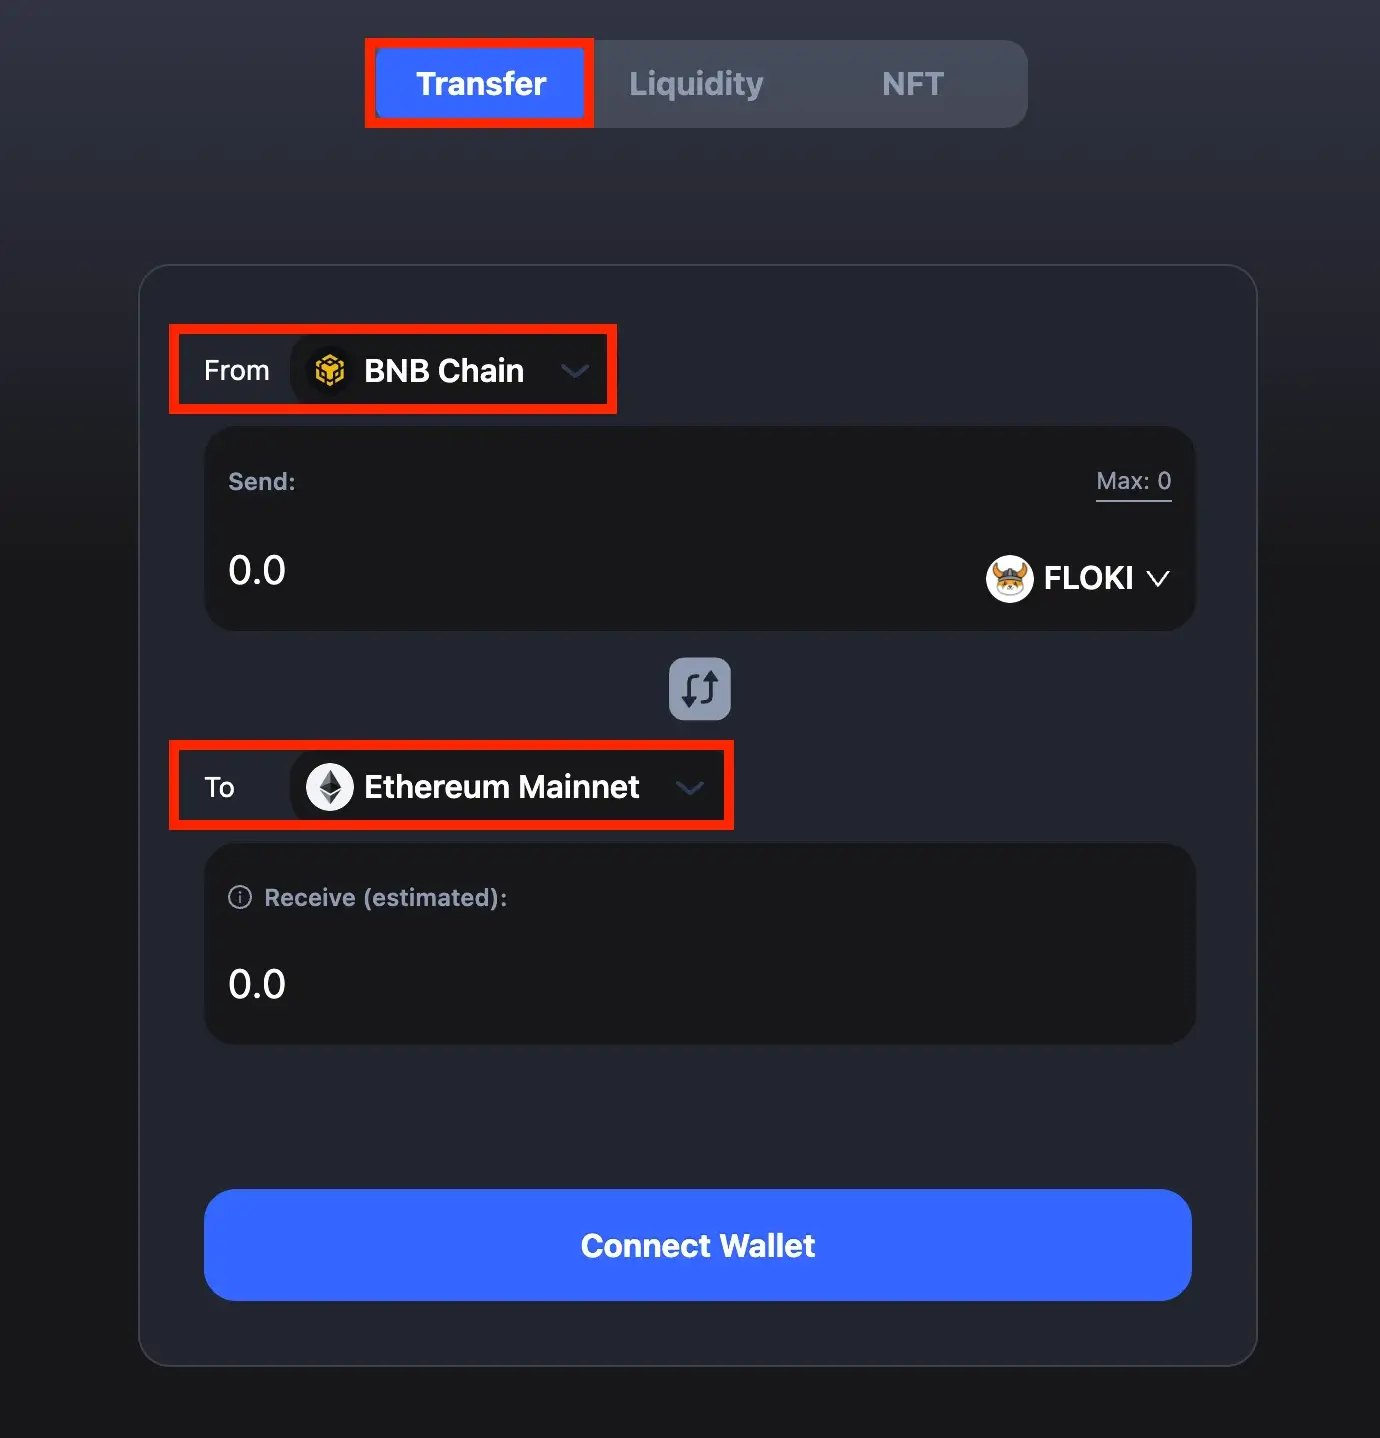 Step 2. Go to the Bridge Website and Connect Your Wallet to It